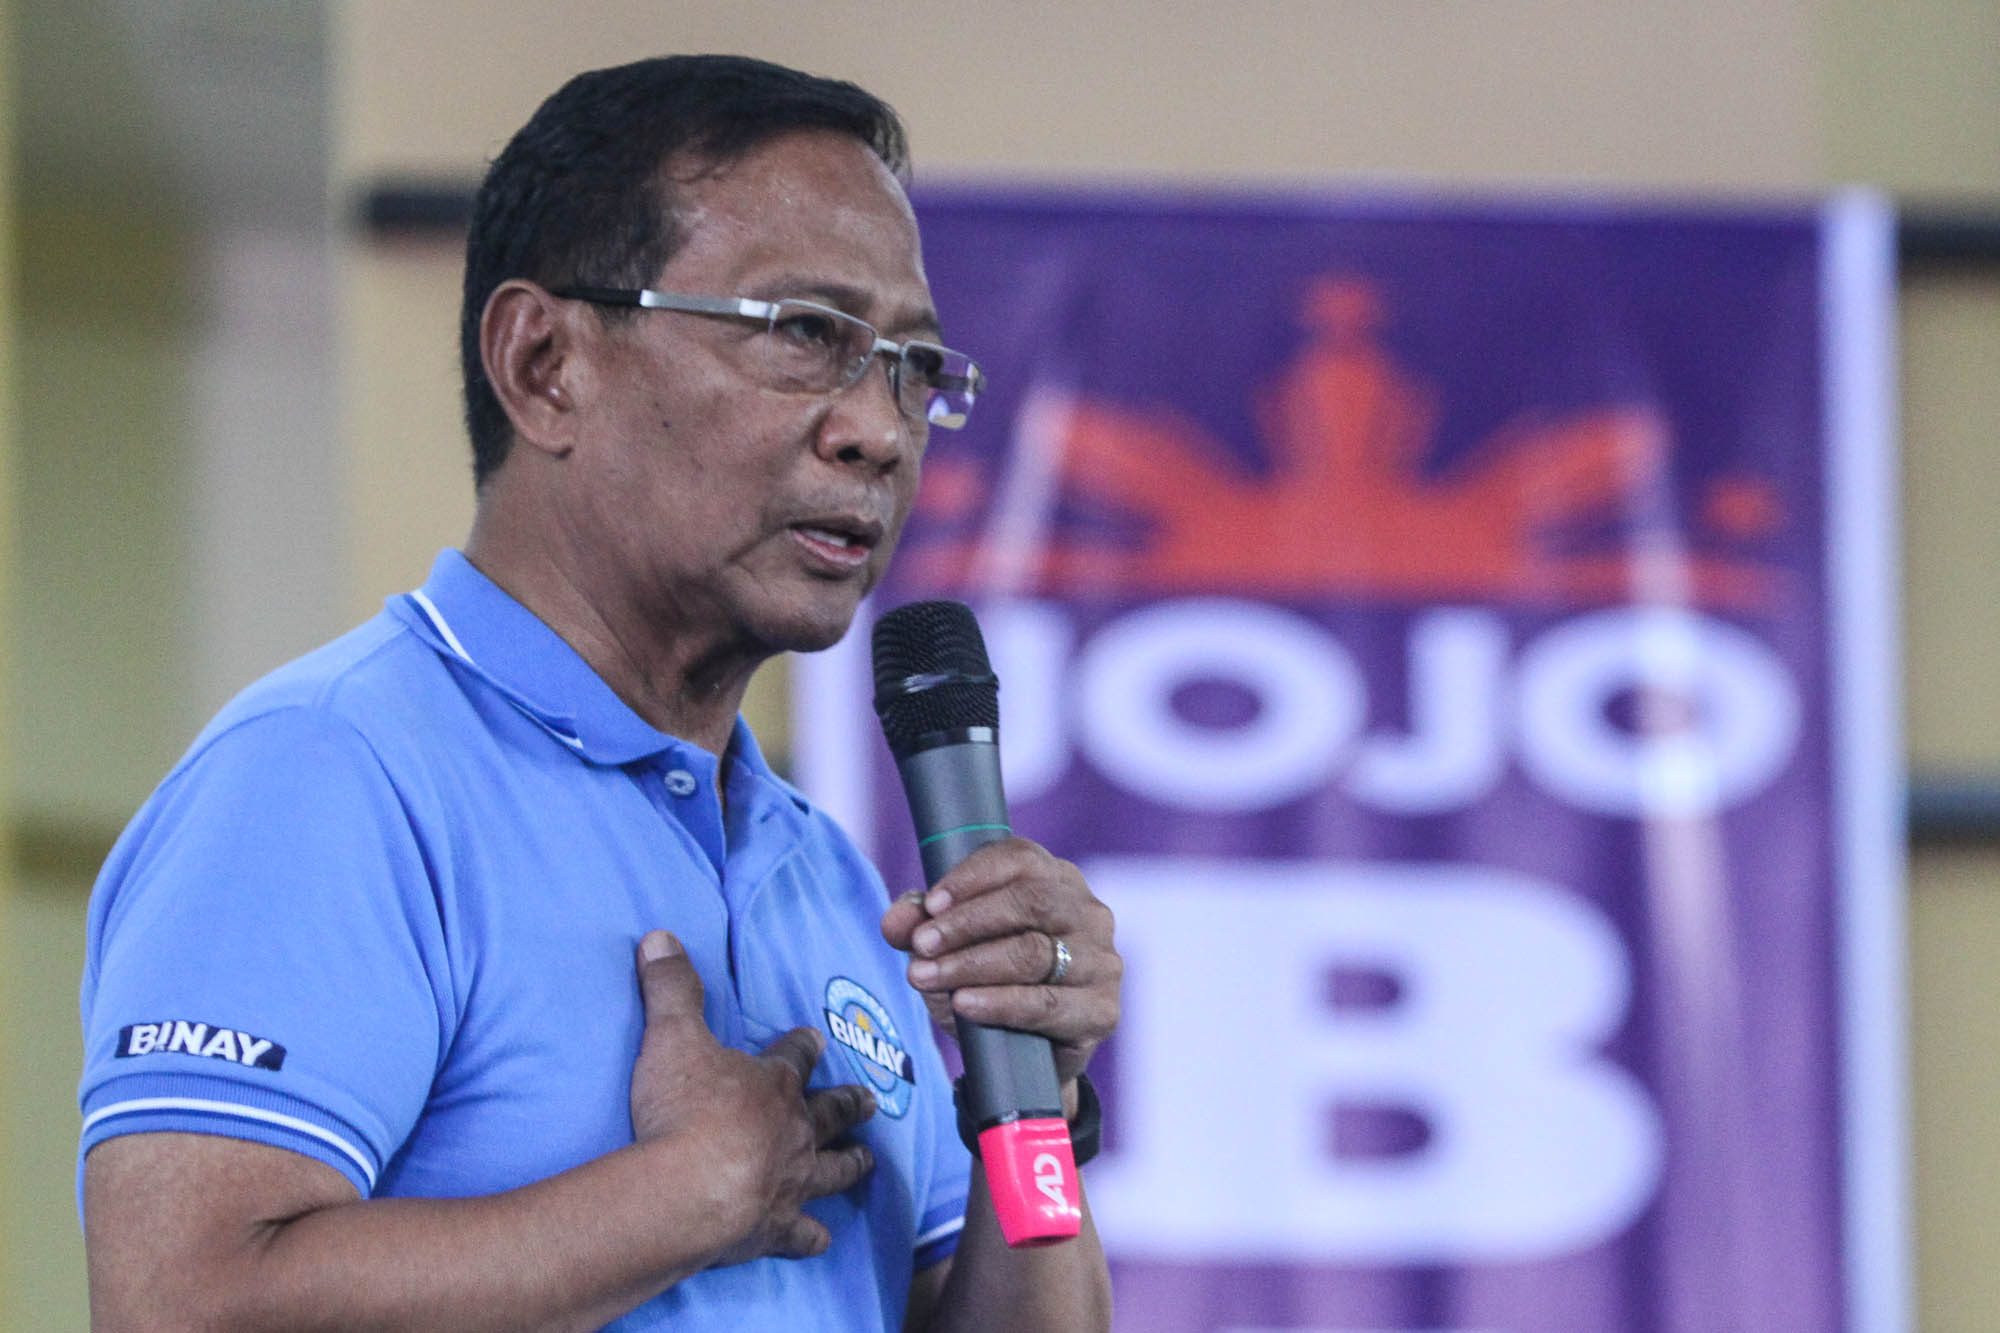 Binay to trim list of CCT beneficiaries